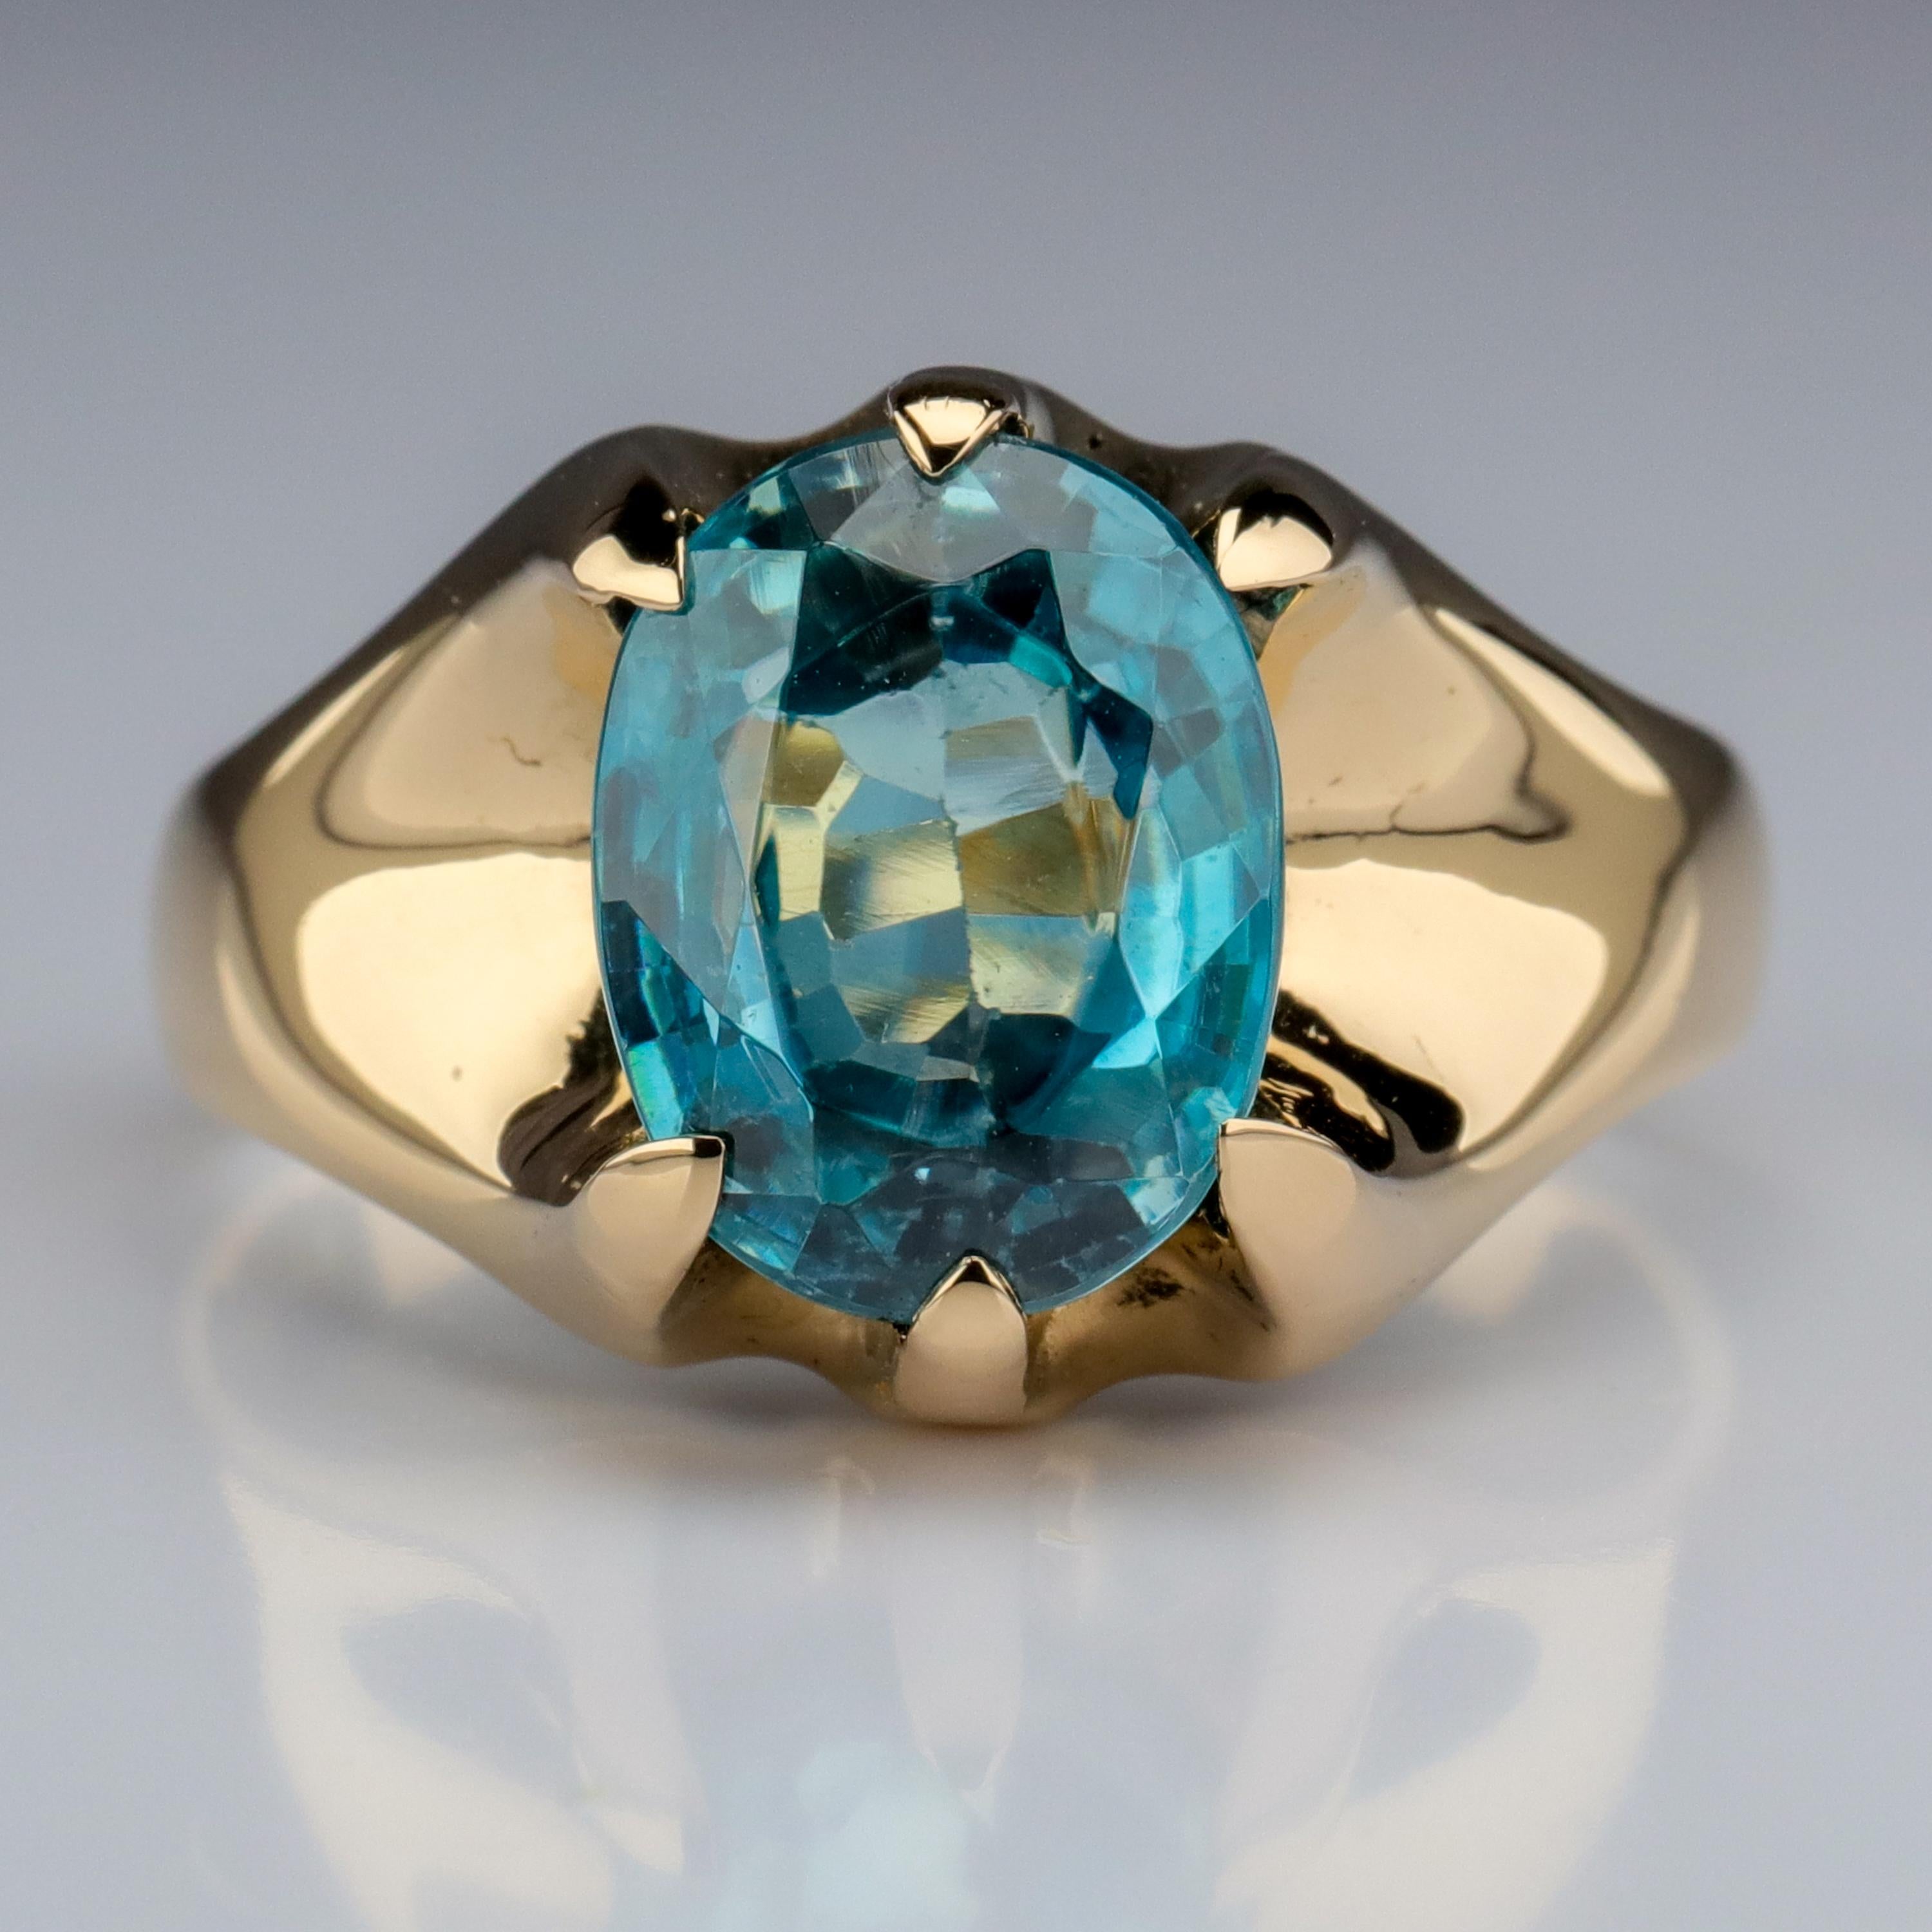 A favorite among collectors but still unknown to most people, zircon is a natural gemstone that can nearly match the diamonds for fire. 

Zircon is famous for its fire. And this circa 1940s men's ring features a beautiful blue stone with tremendous